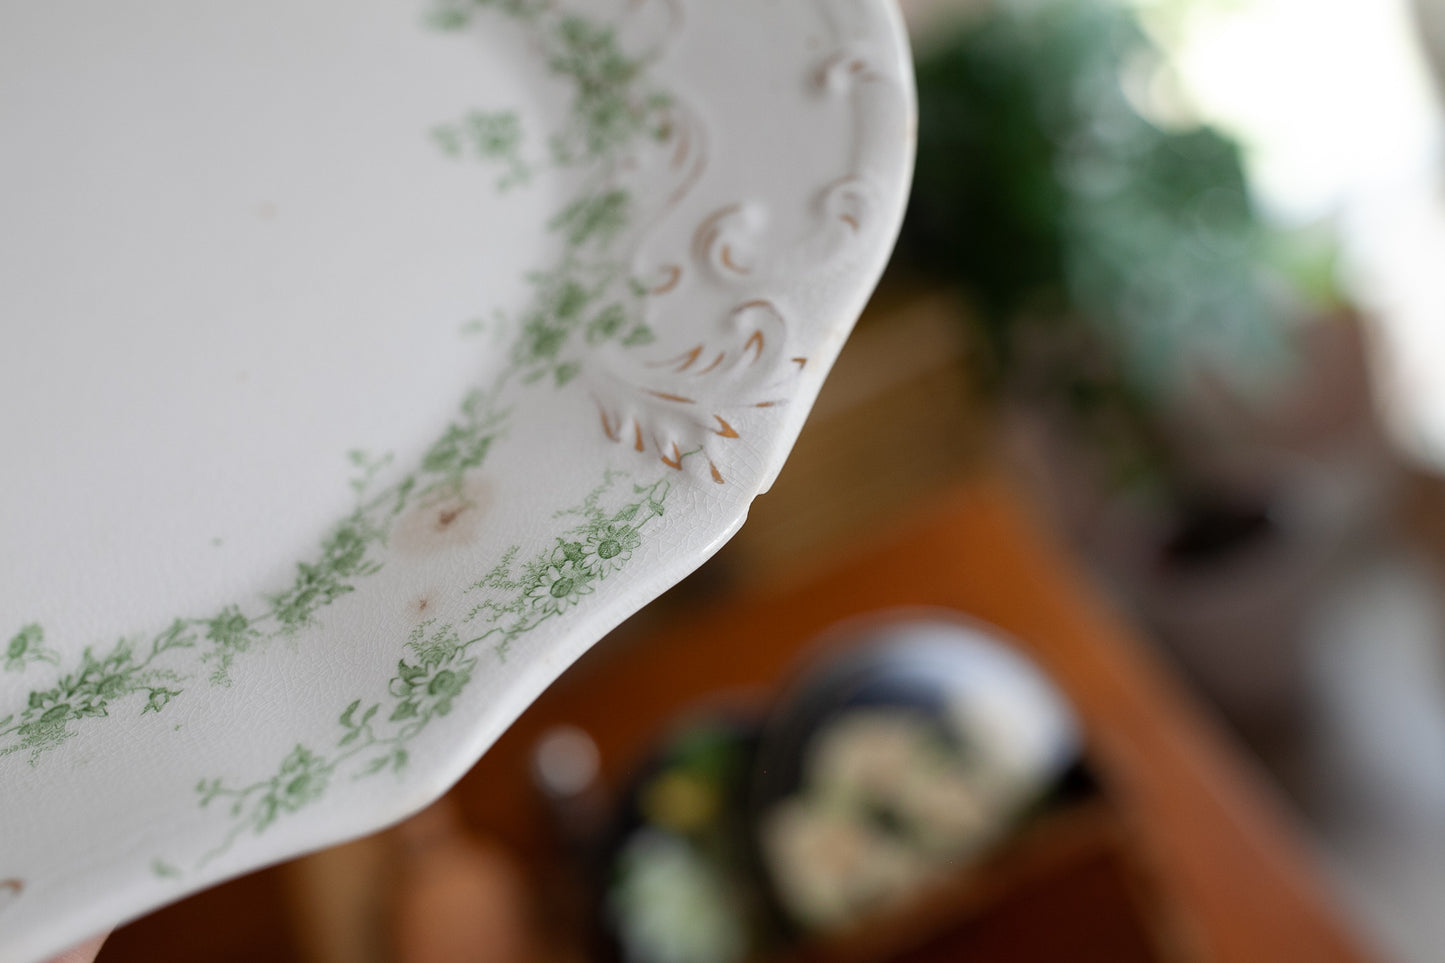 Antique Platter - Antique Green and White Transferware